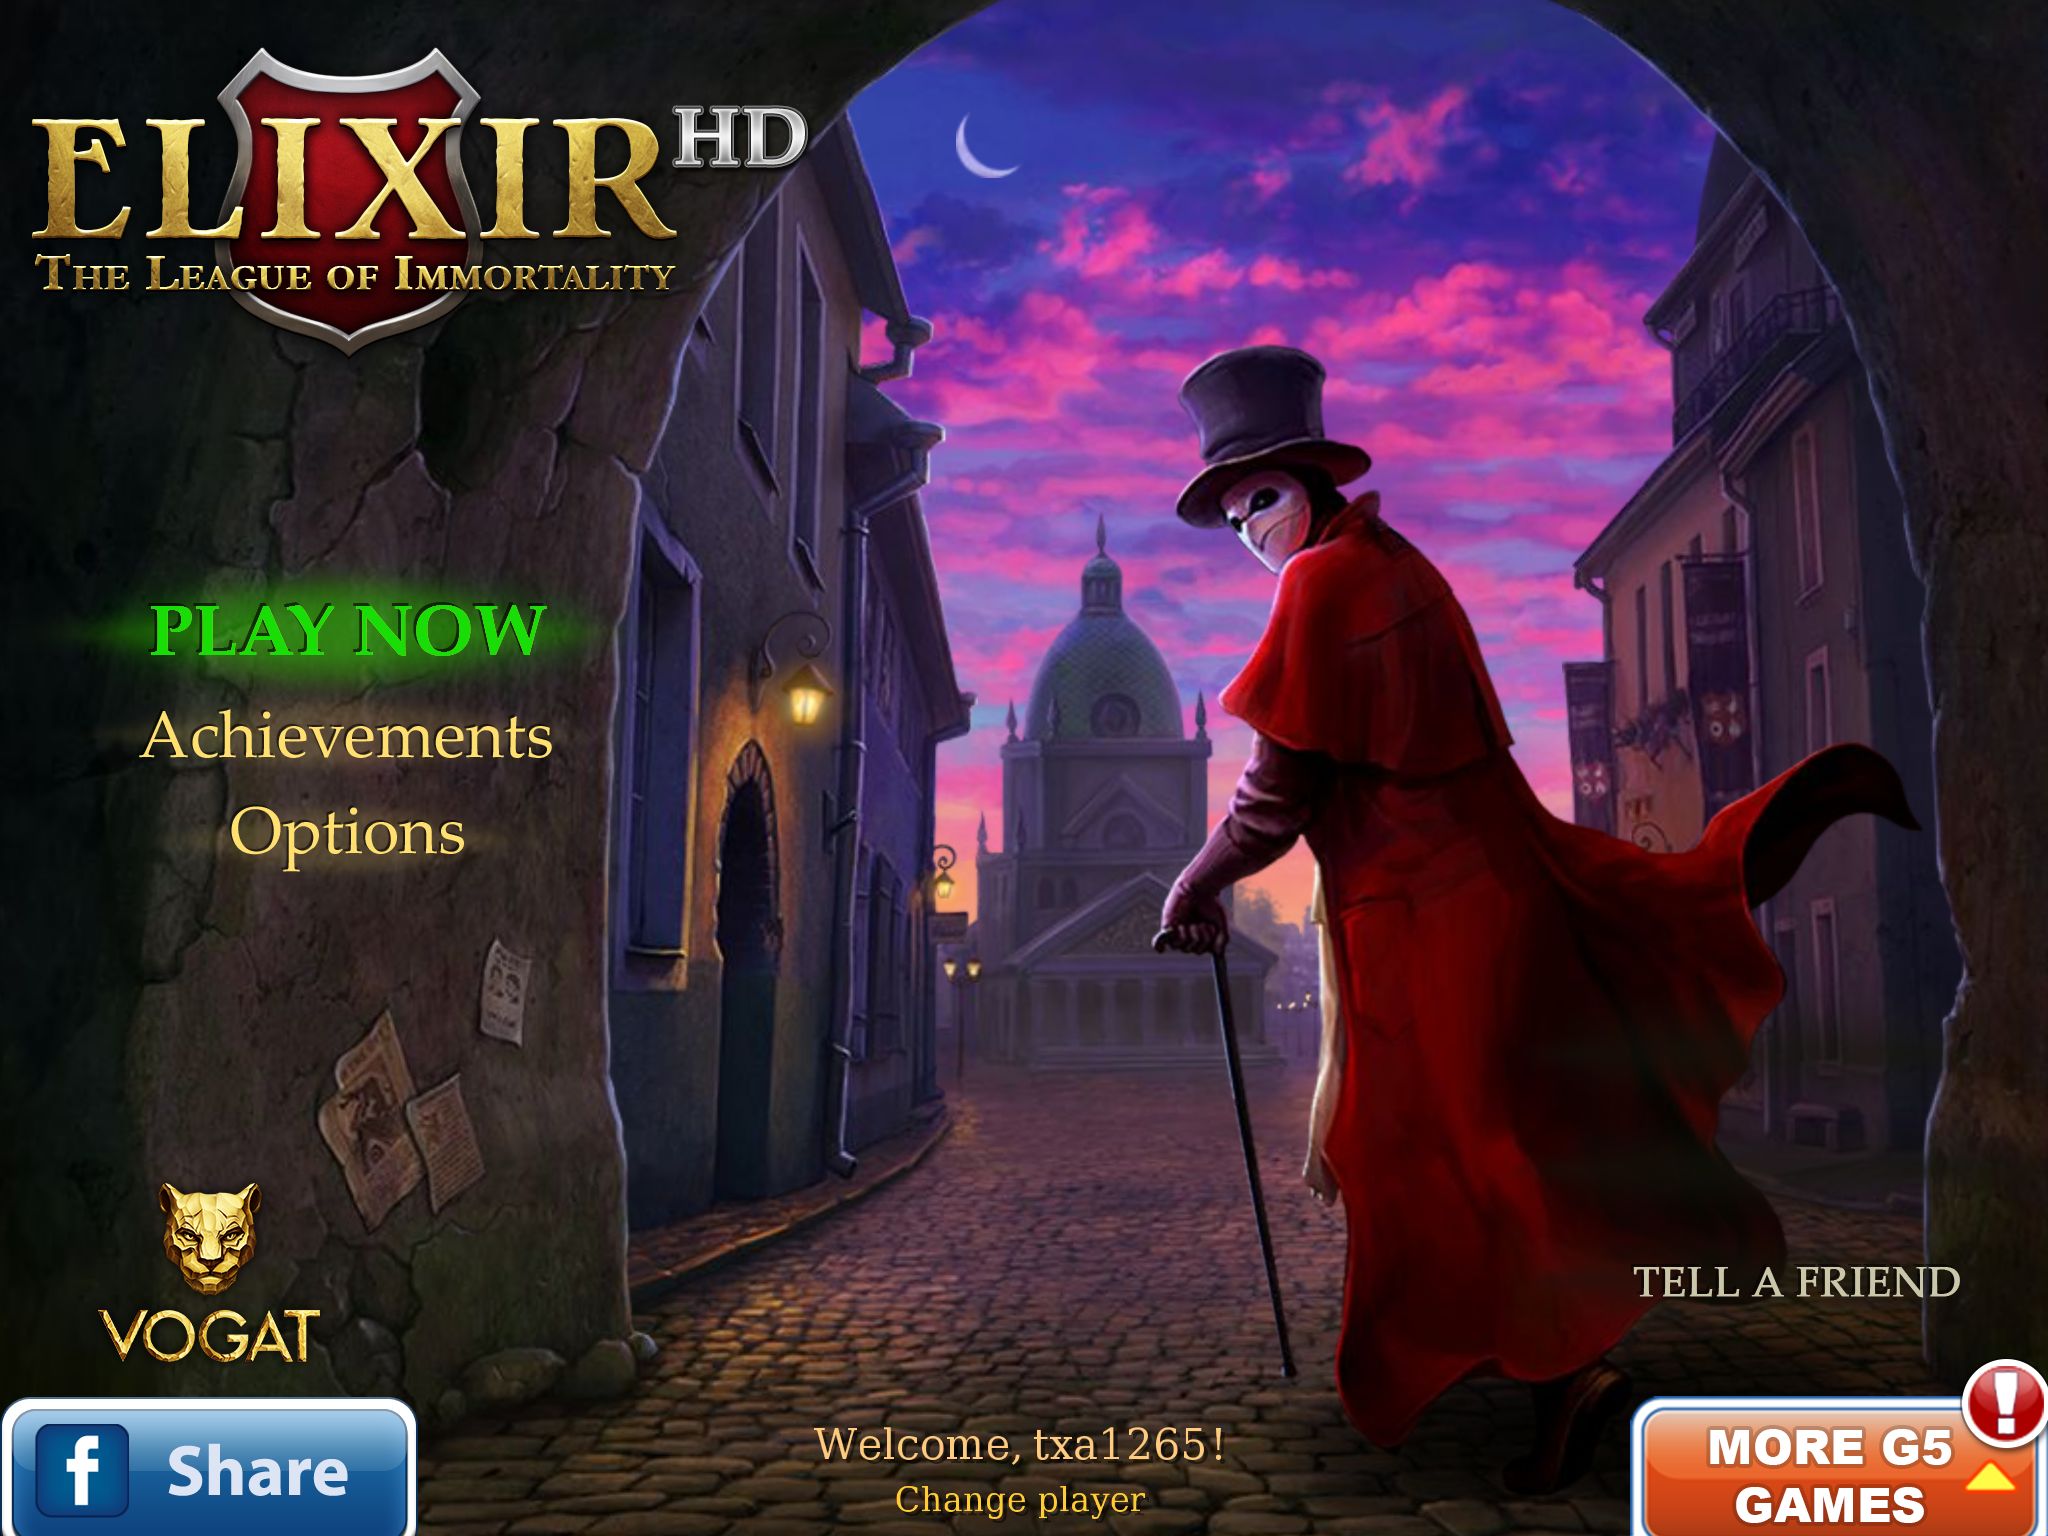 Elixir: The League of Immortality HD for iPad Review